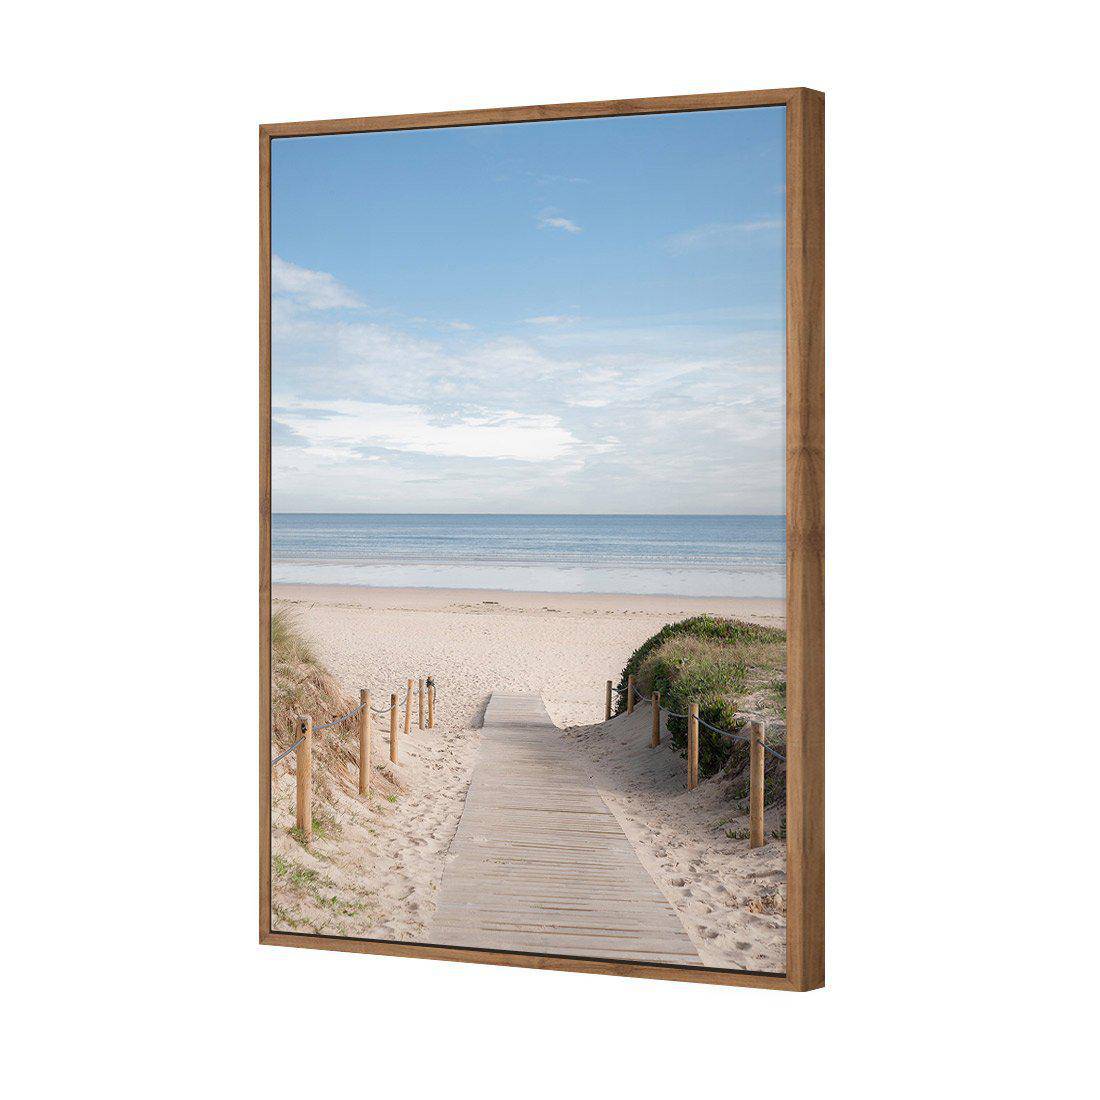 Pathway To The Sea Canvas Art-Canvas-Wall Art Designs-45x30cm-Canvas - Natural Frame-Wall Art Designs